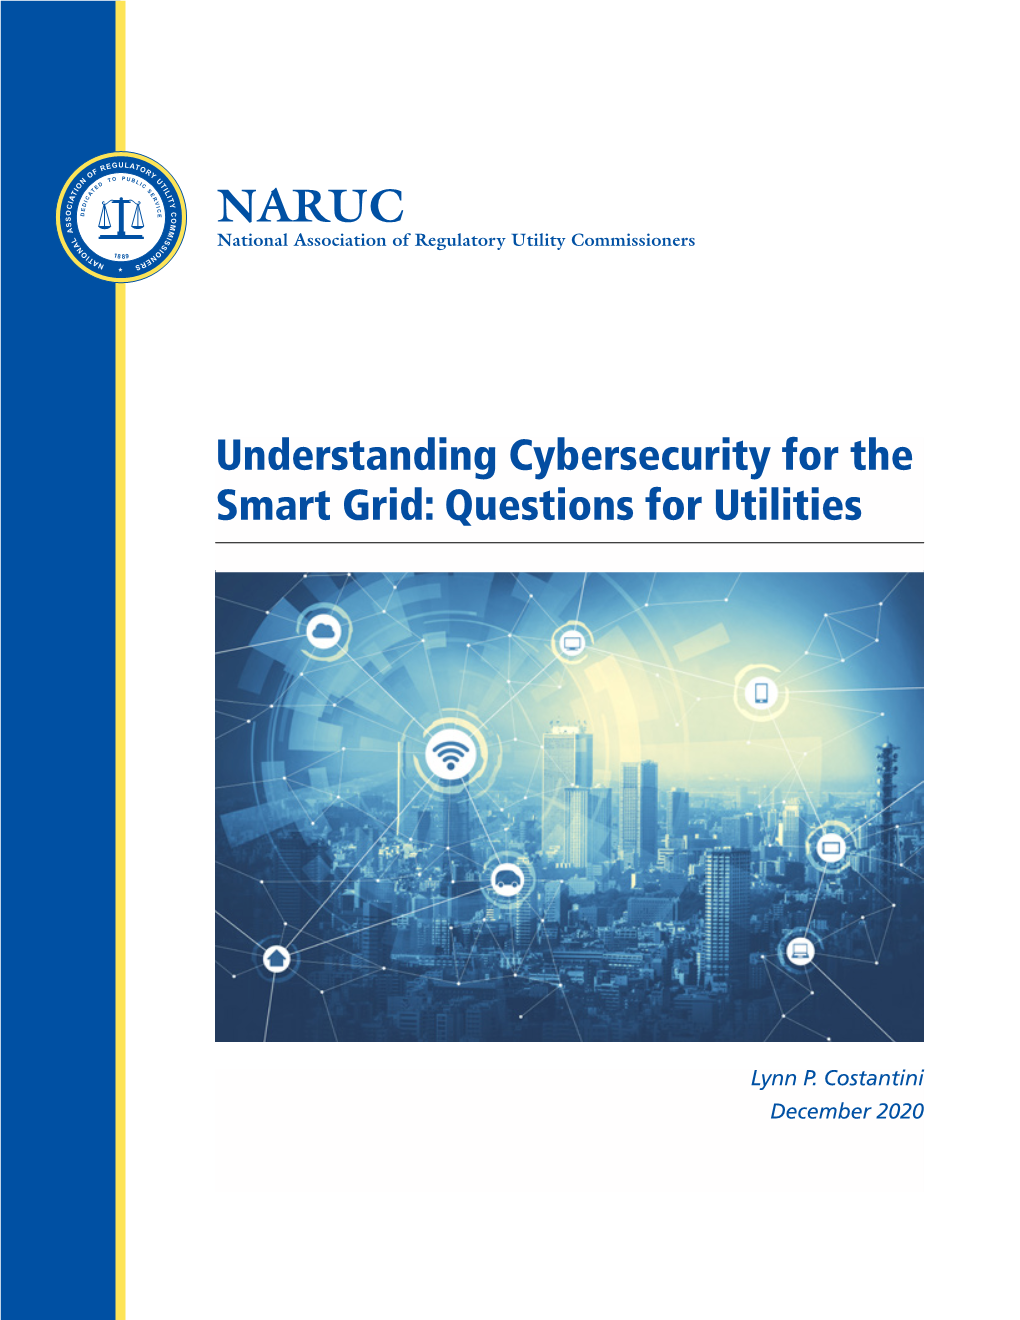 Understanding Cybersecurity for the Smart Grid: Questions for Utilities